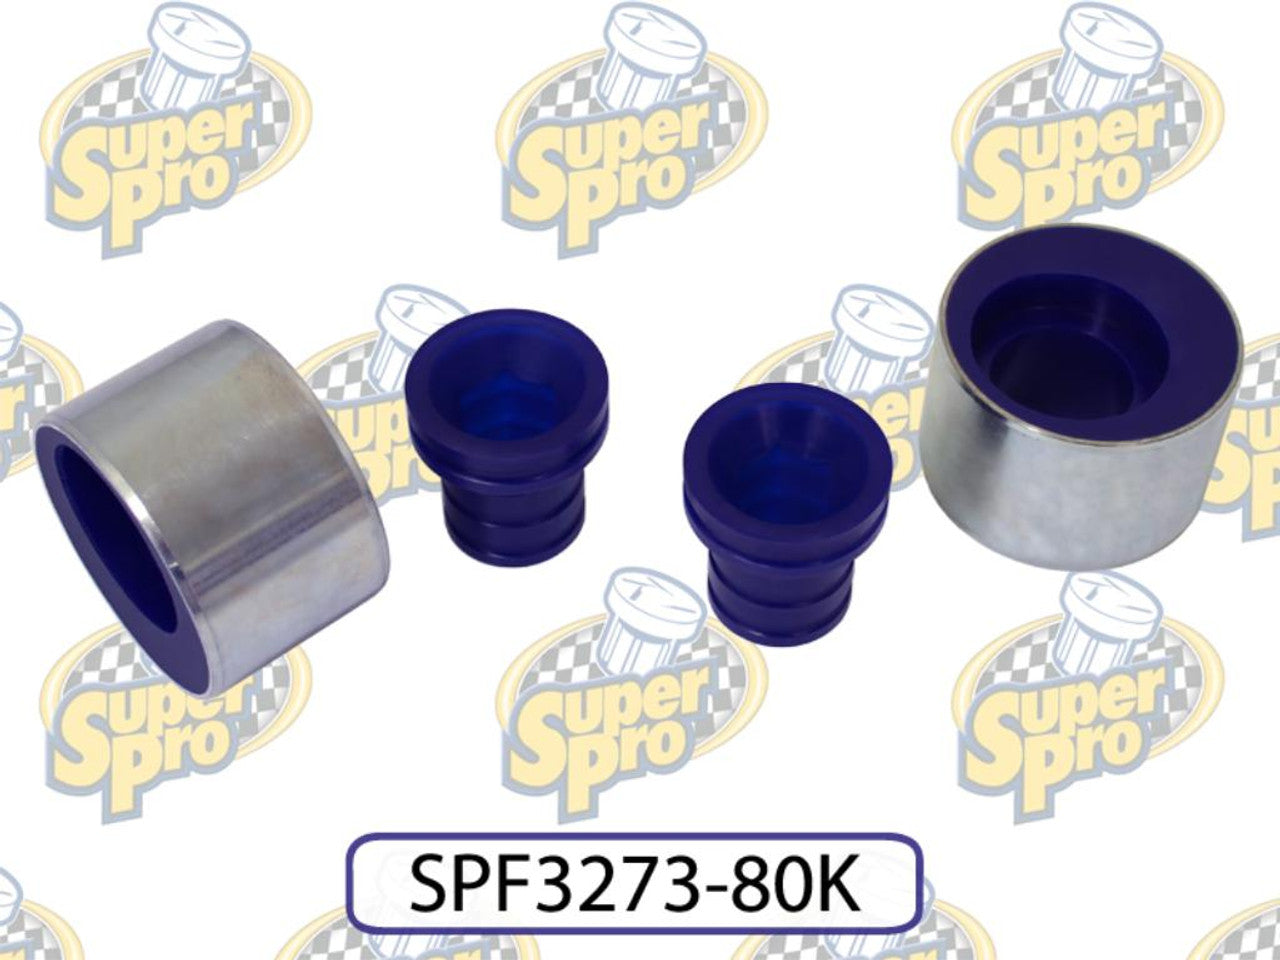 Superpro Front Control Arm Lower-Inner Rear Bush Kit: High-Performance Anti-Lift and Caster Increase Bush Kit - Golf MK6 2WD+4WD